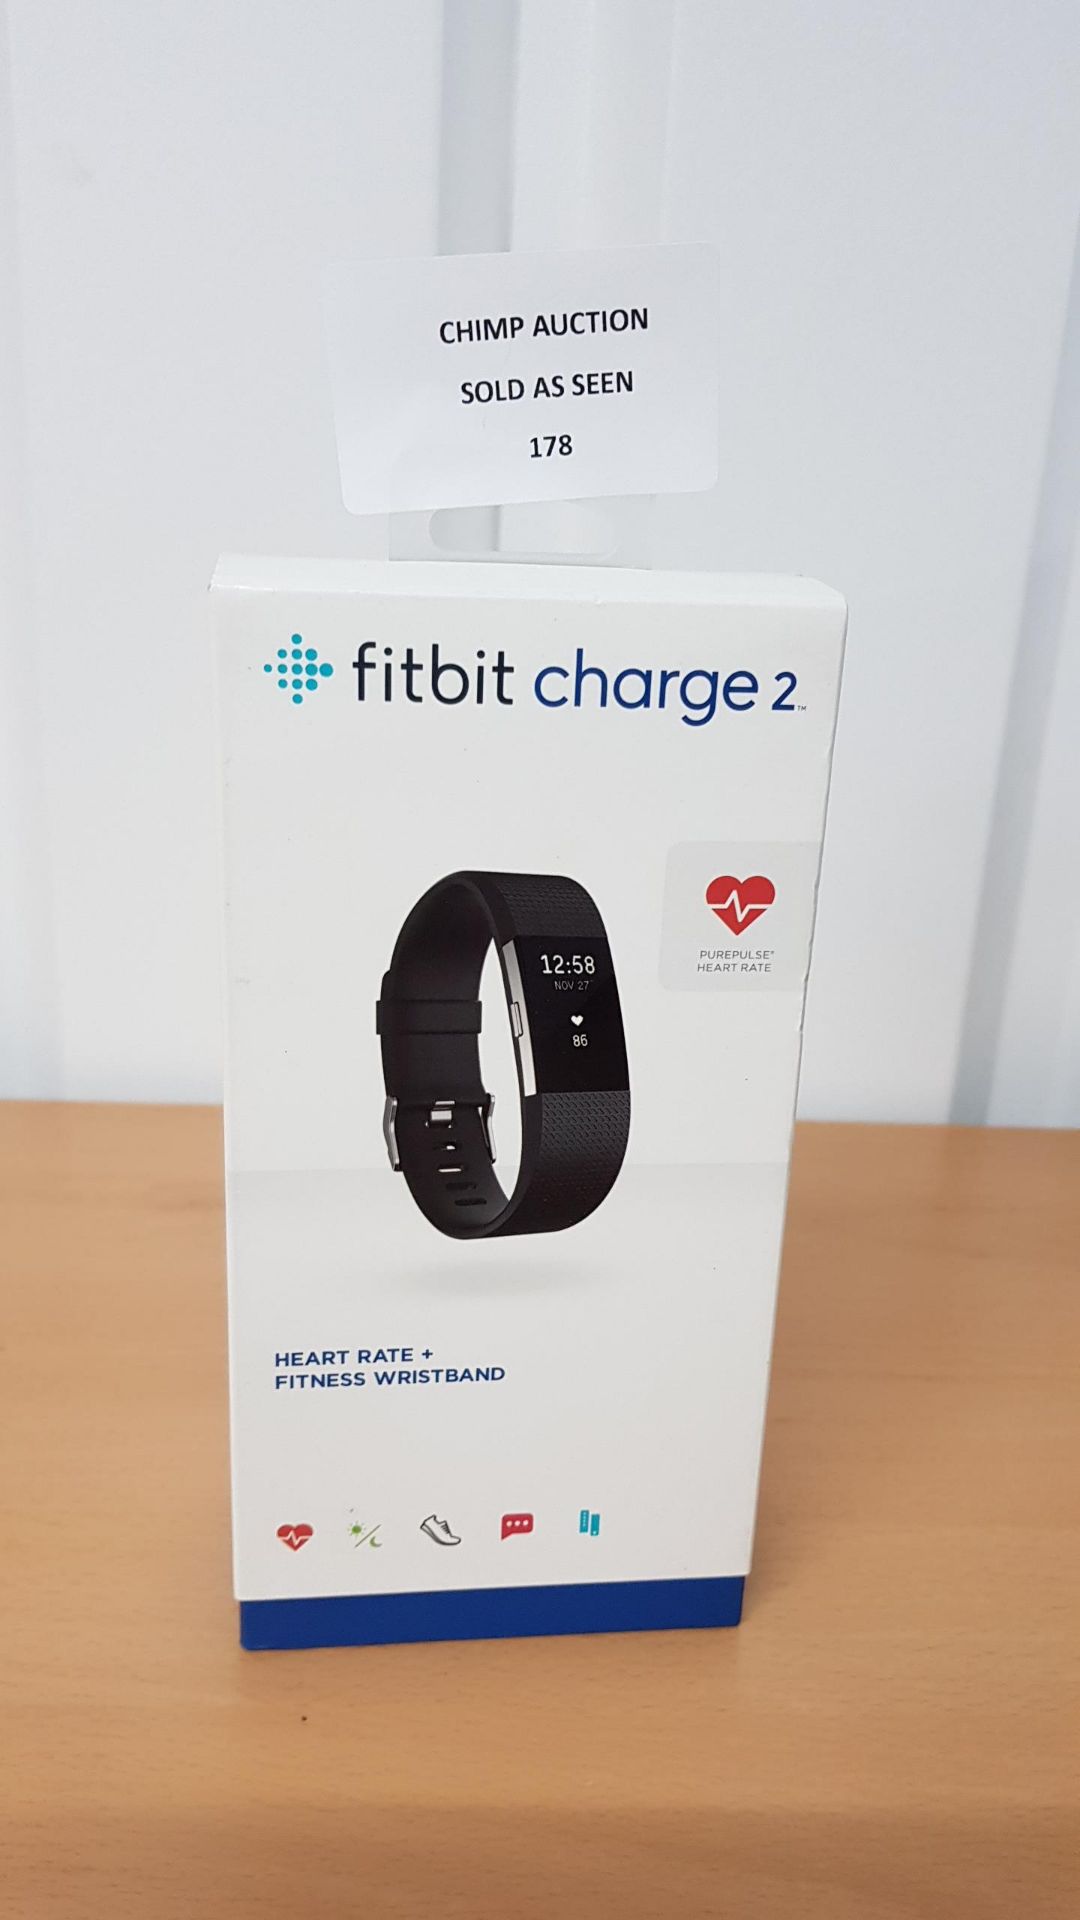 Fitbit Charge 2 Heart Rate and Fitness Wristband Smart watch RRP £159.99